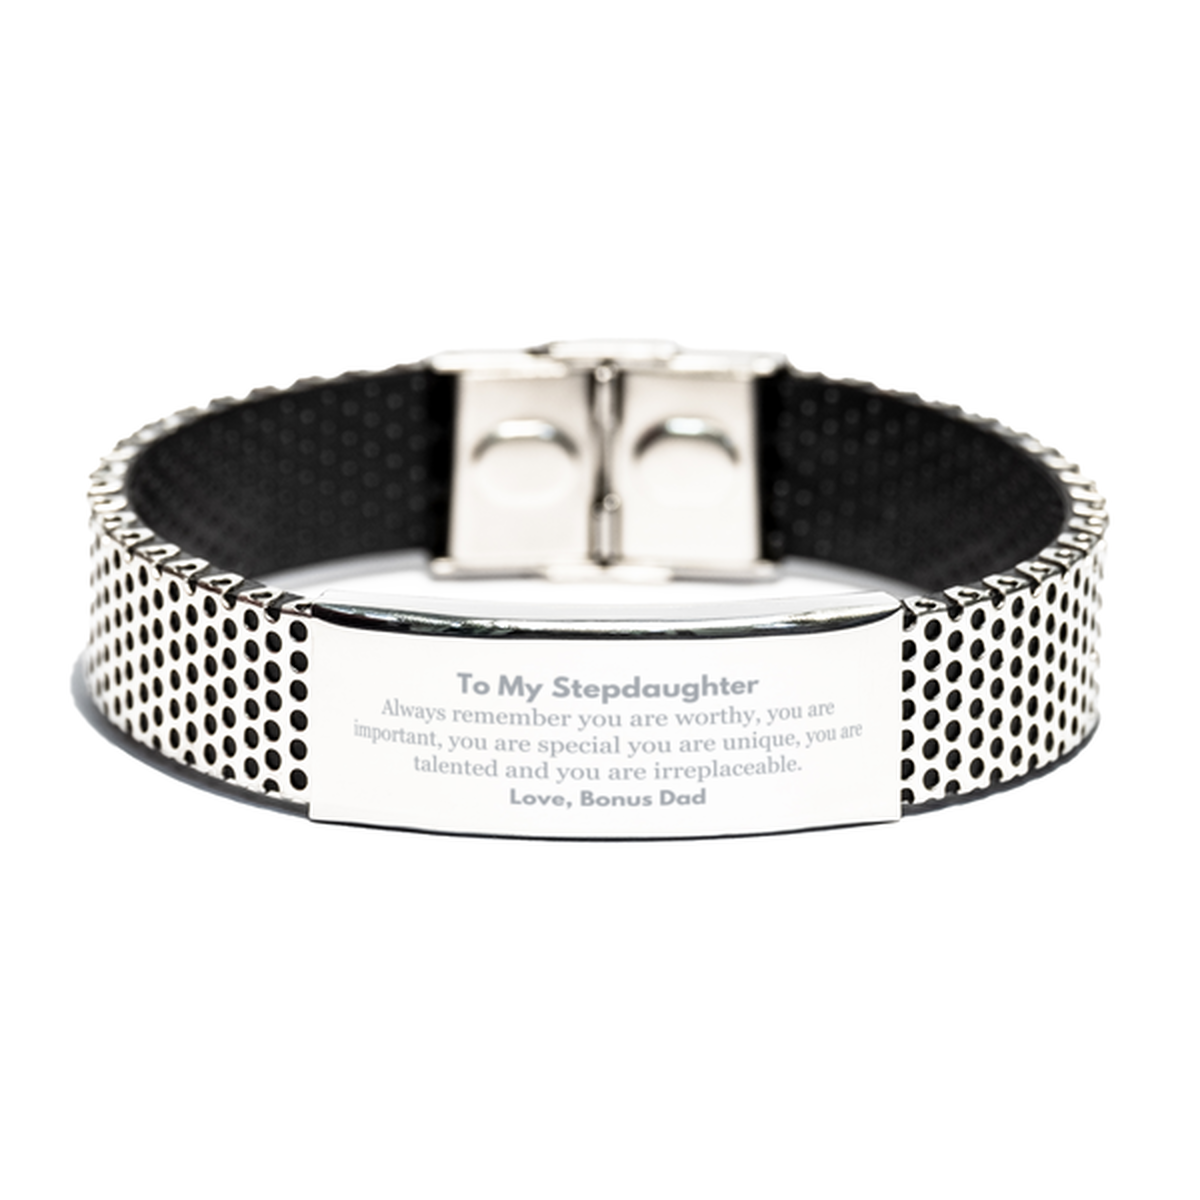 Stepdaughter Birthday Gifts from Bonus Dad, Inspirational Stainless Steel Bracelet for Stepdaughter Christmas Graduation Gifts for Stepdaughter Always remember you are worthy, you are important. Love, Bonus Dad